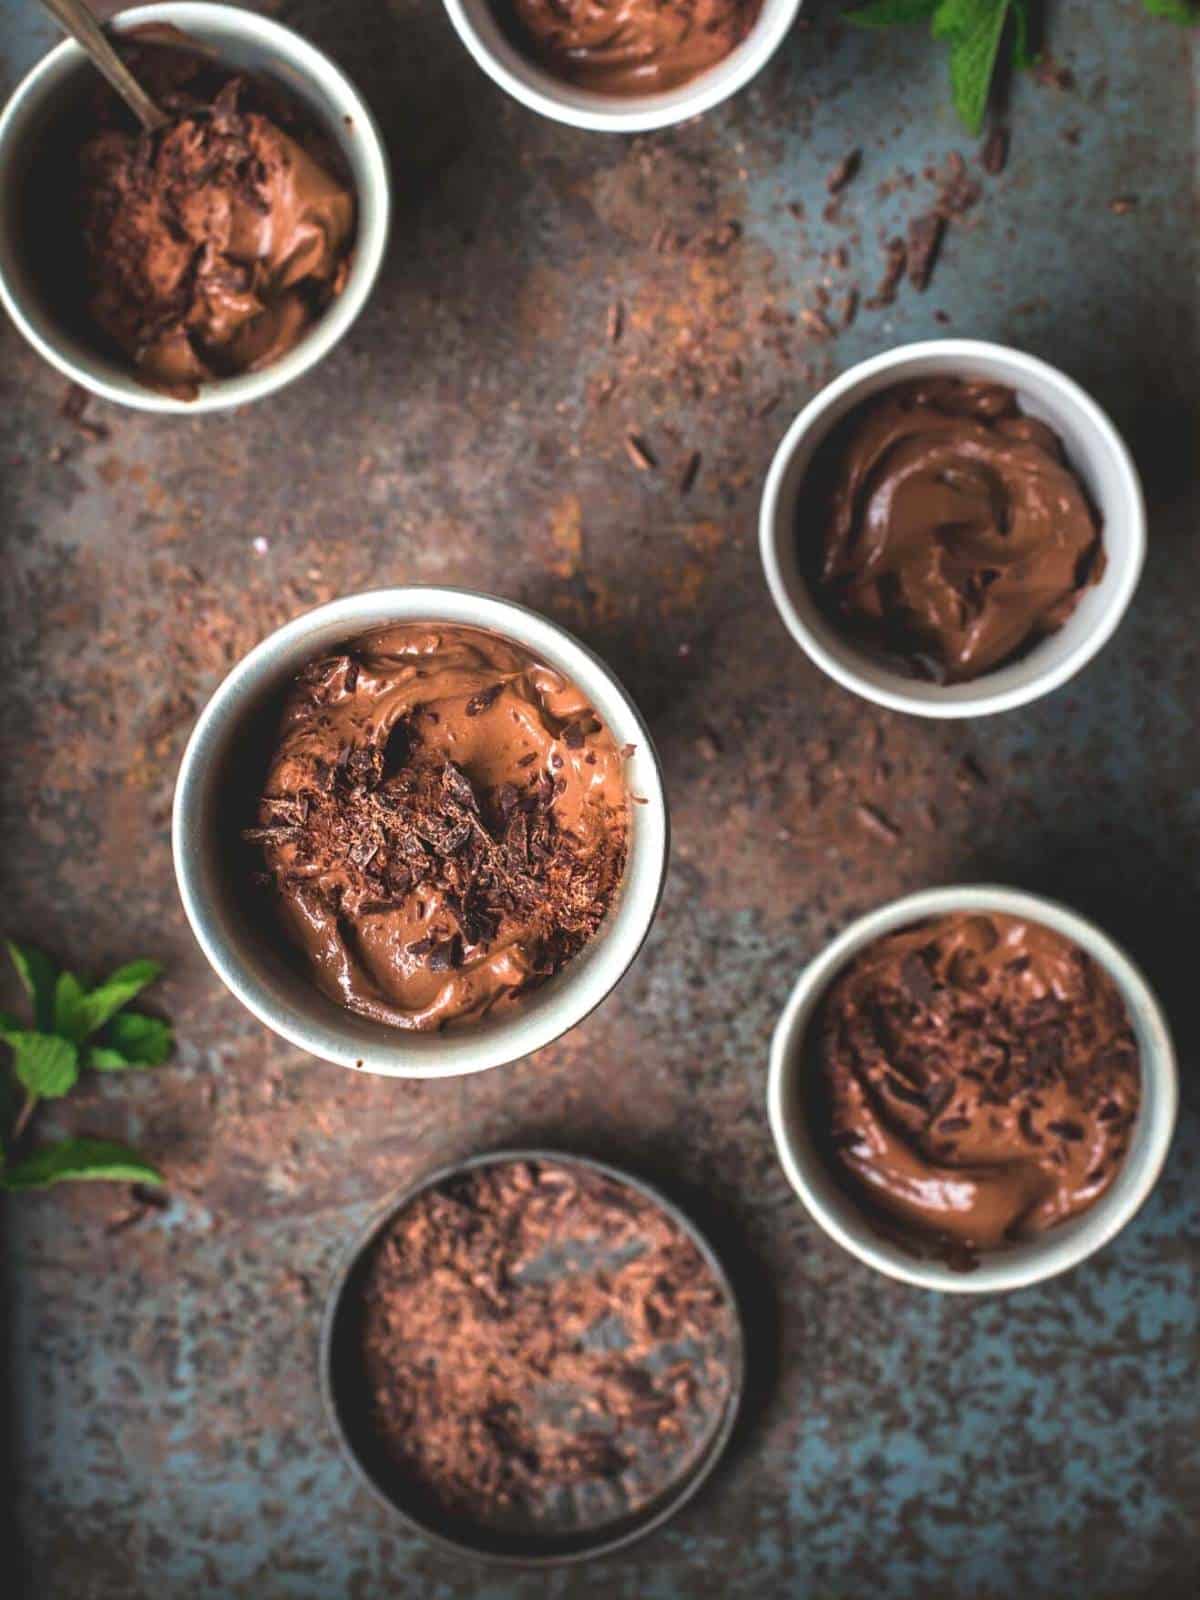 Chocolate mousse in pots with chocolate shavings.